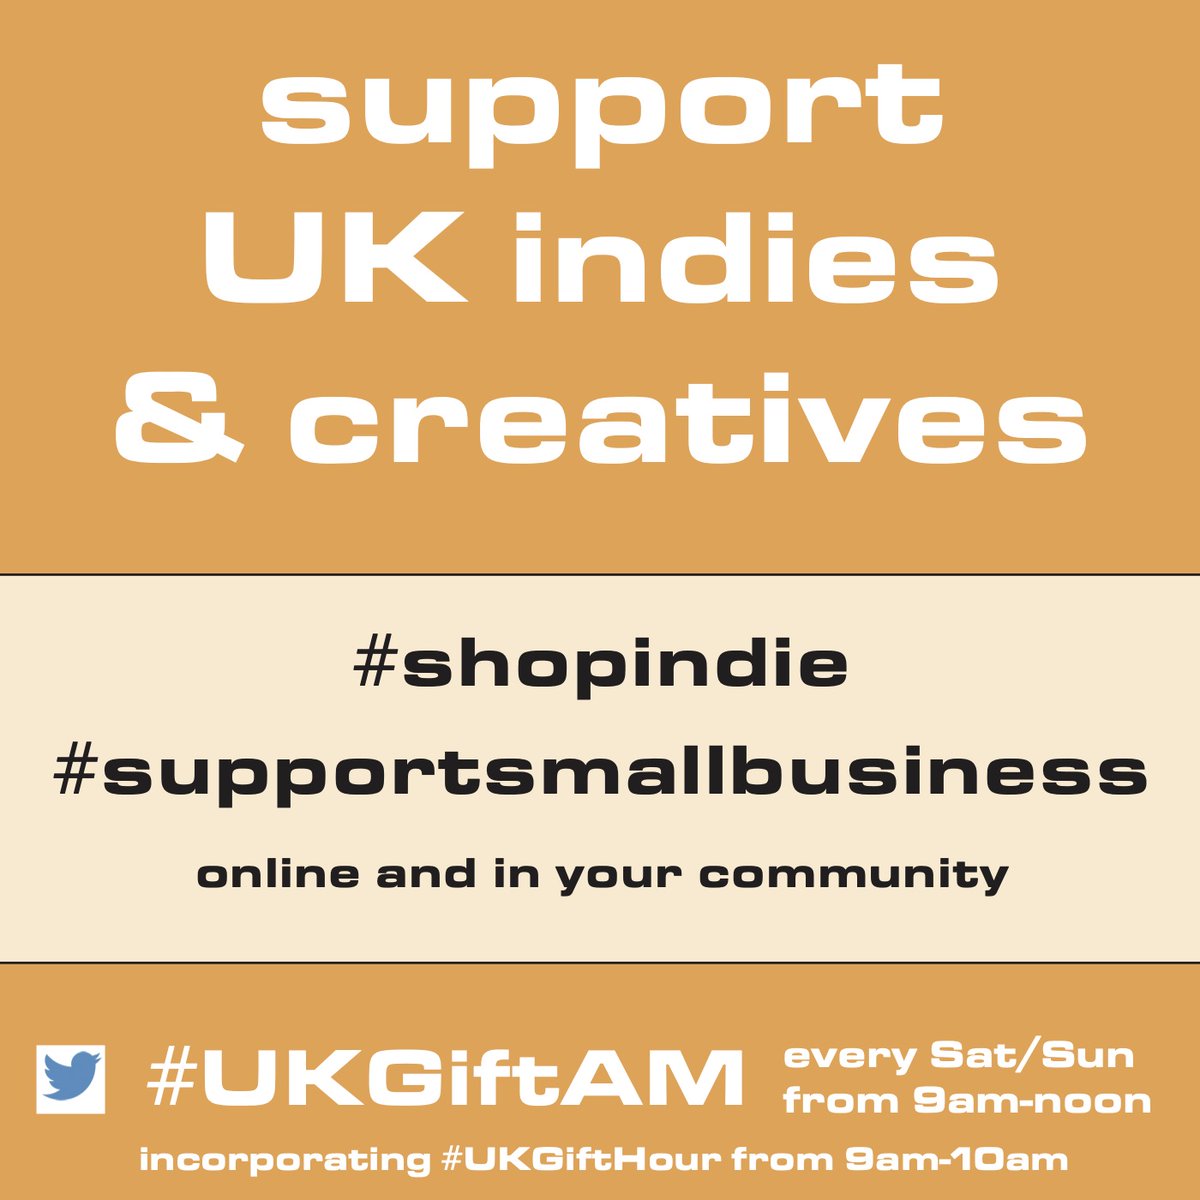 Every little bit helps... and our little bit is to showcase #shopindie #giftideas from UK indies & creatives on #UKGiftHour #UKGiftAM every weekend morning. You're always welcome to join us and do your bit too - it's full of fun and surprises 🙂🤗 #supportsmallbusiness #EarlyBiz